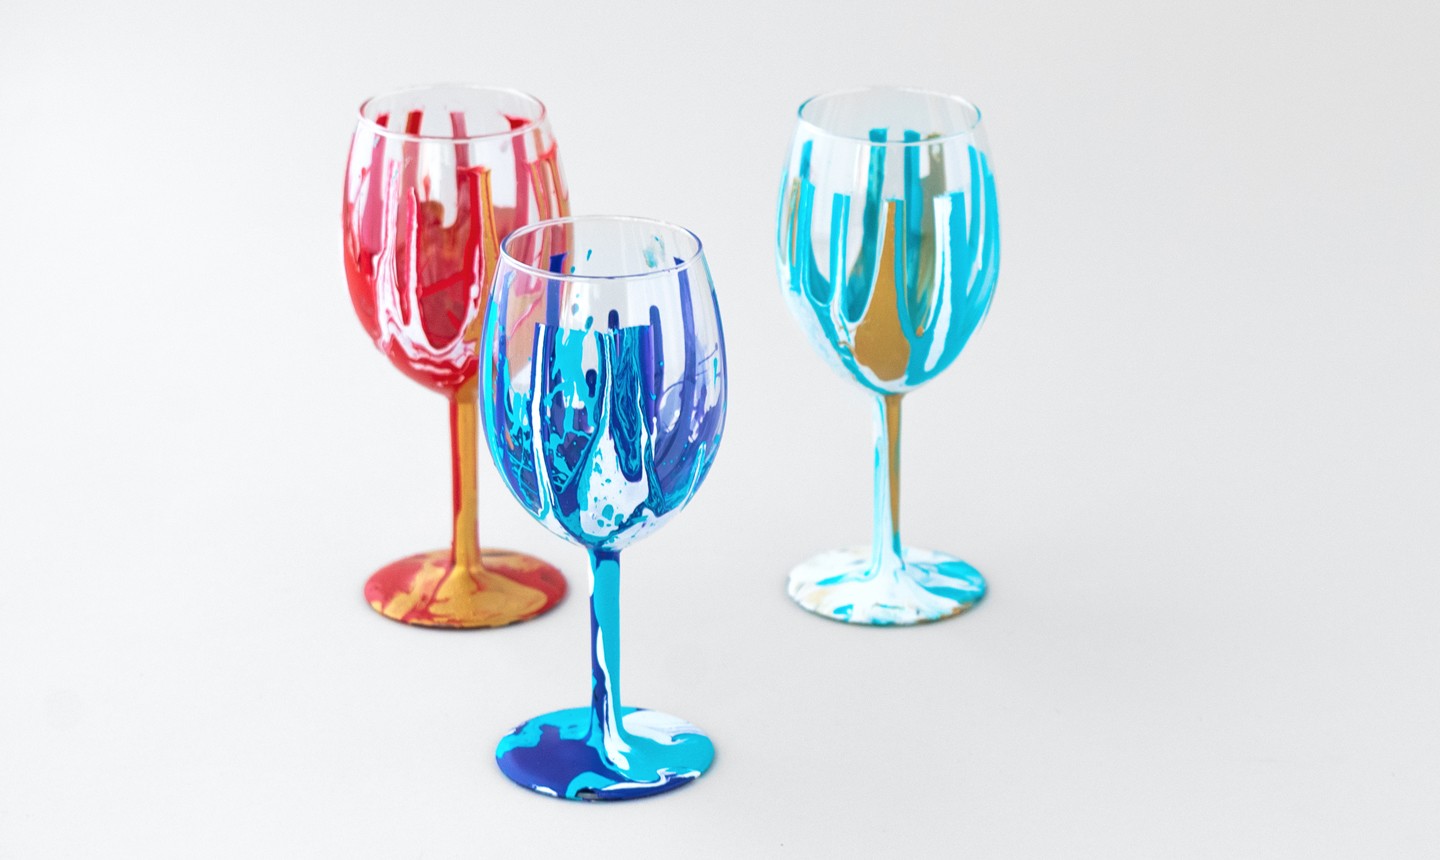 What Kind Of Paint Should Be Used For Wine Glasses?